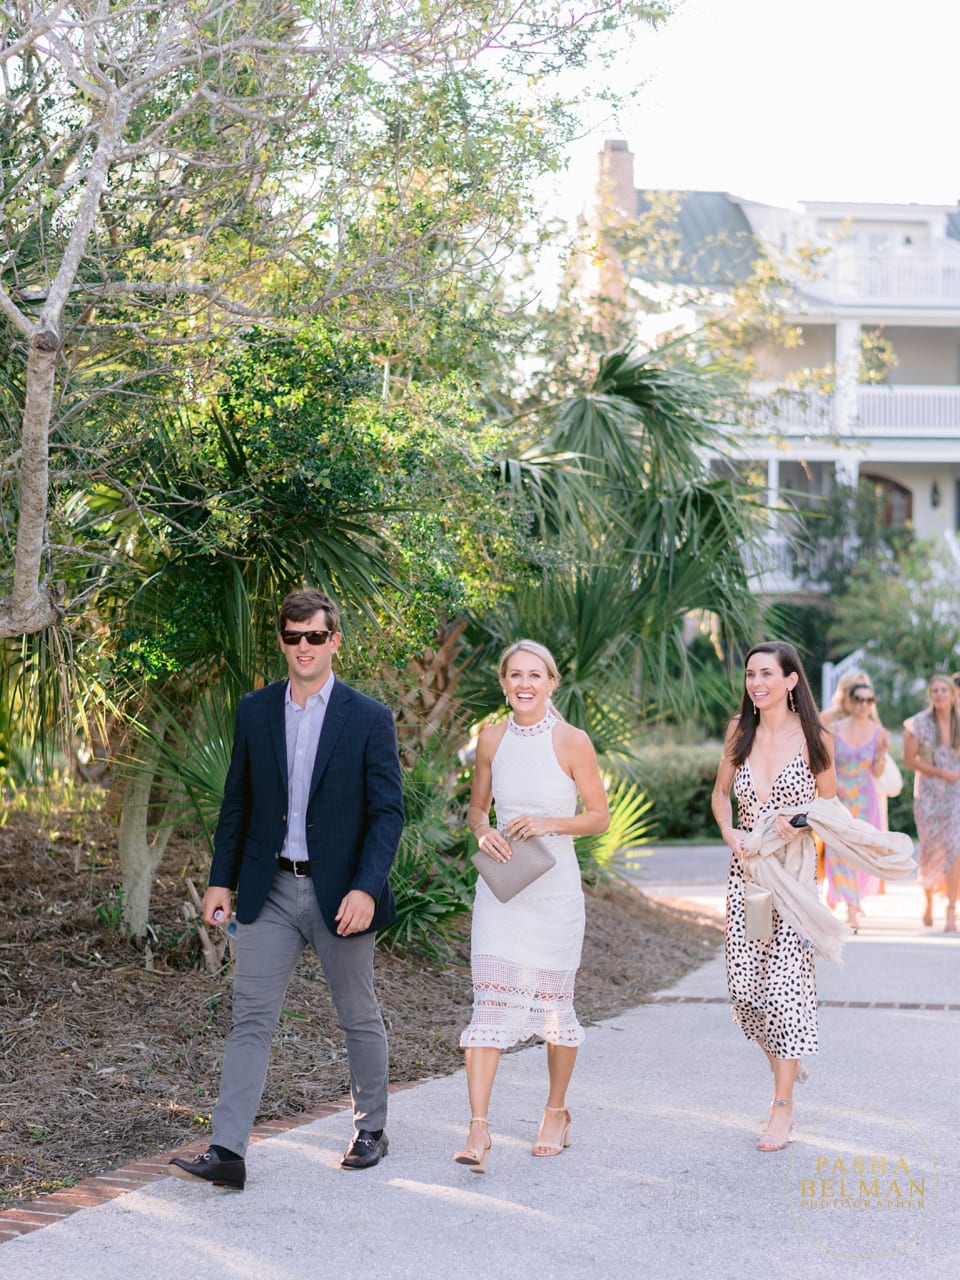 Rehearsal Dinner Photos at Debordieu Colony by Pasha Belman Photography